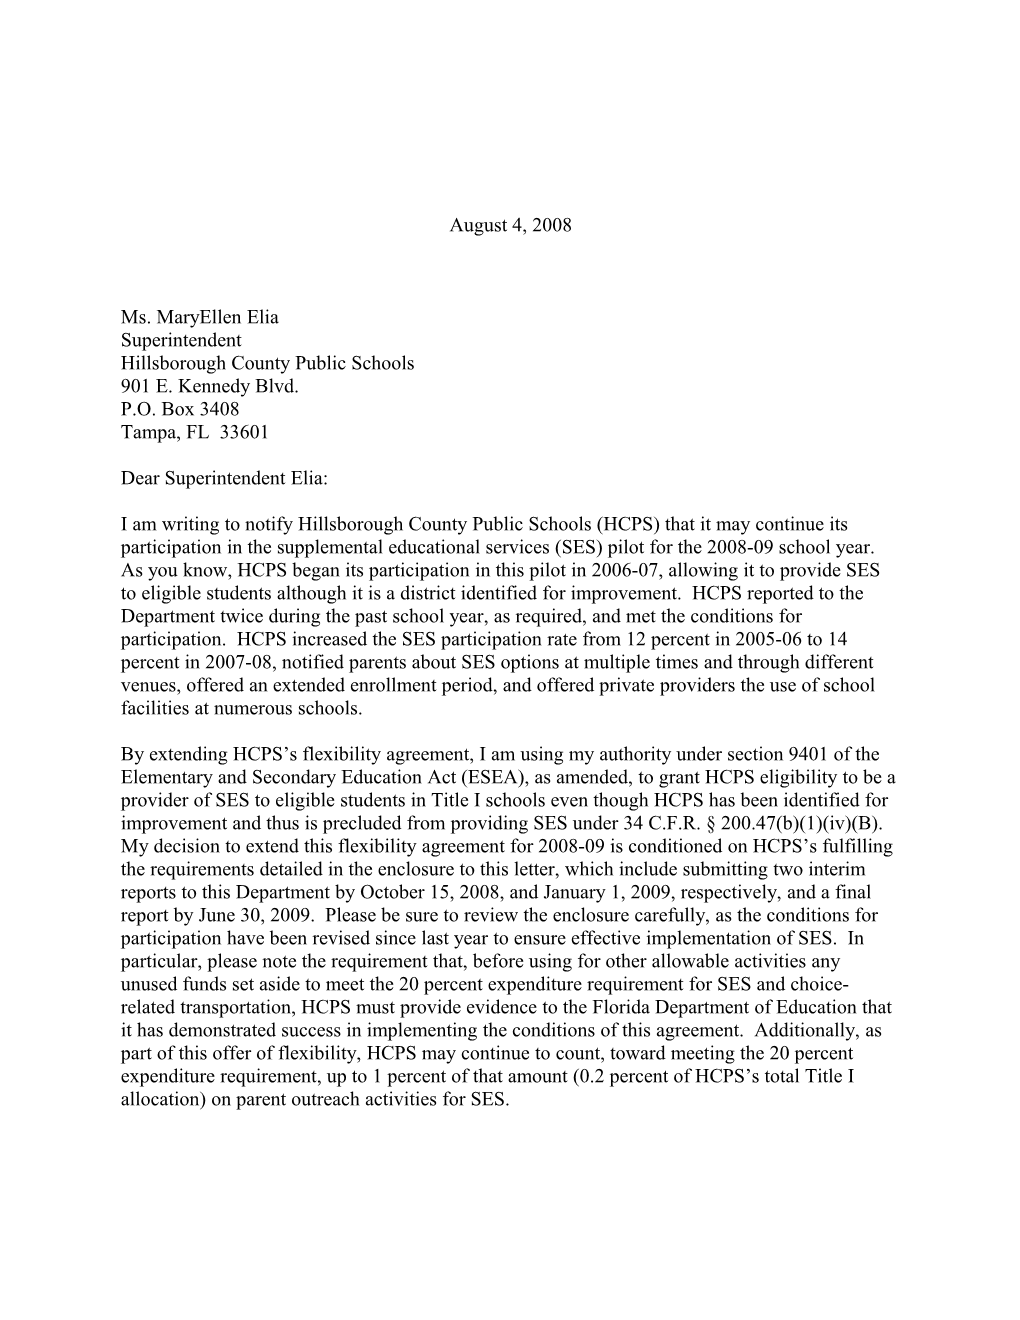 Letter Confirming Hillsborough County Public Schools to Continue Its Participation in Providing